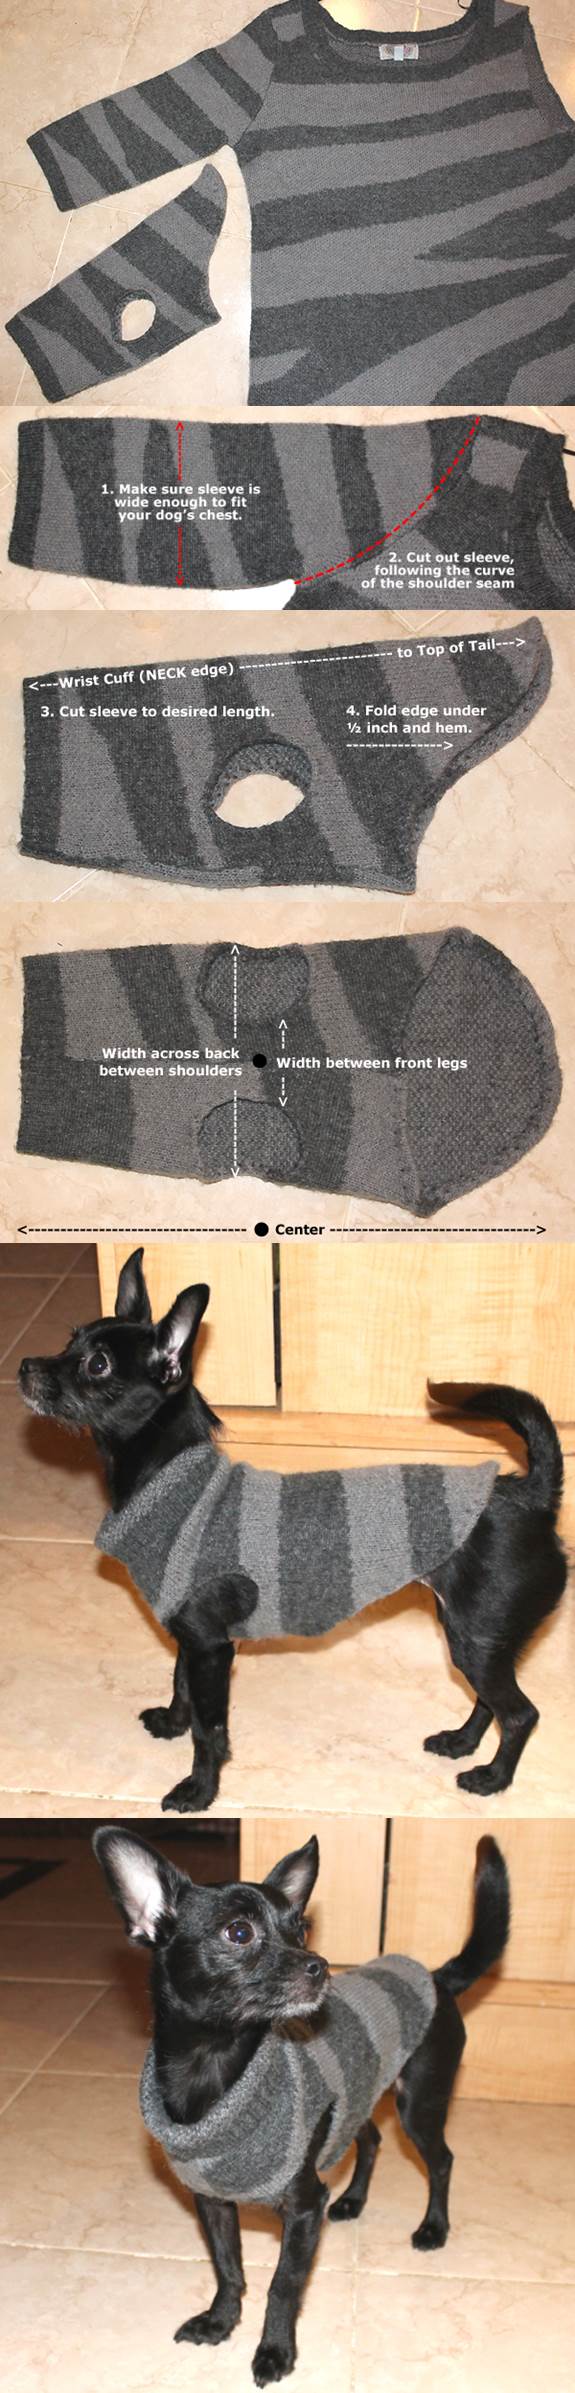 DIY Dog Sweater from a Used Sweater Sleeve 2